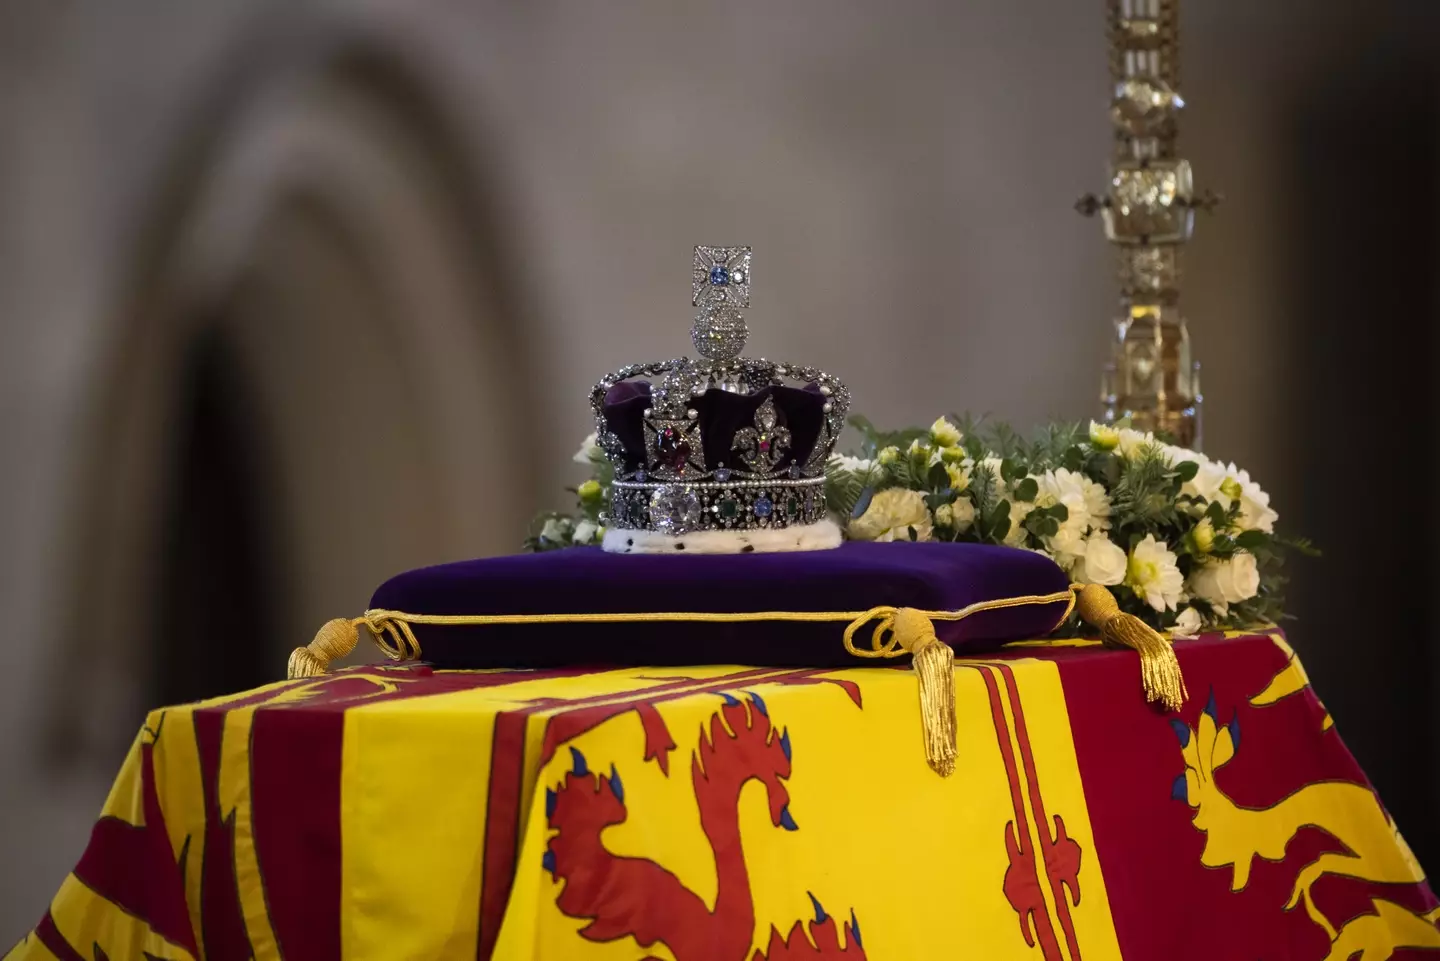 The Queen's funeral is set to go ahead on Monday 19 September.